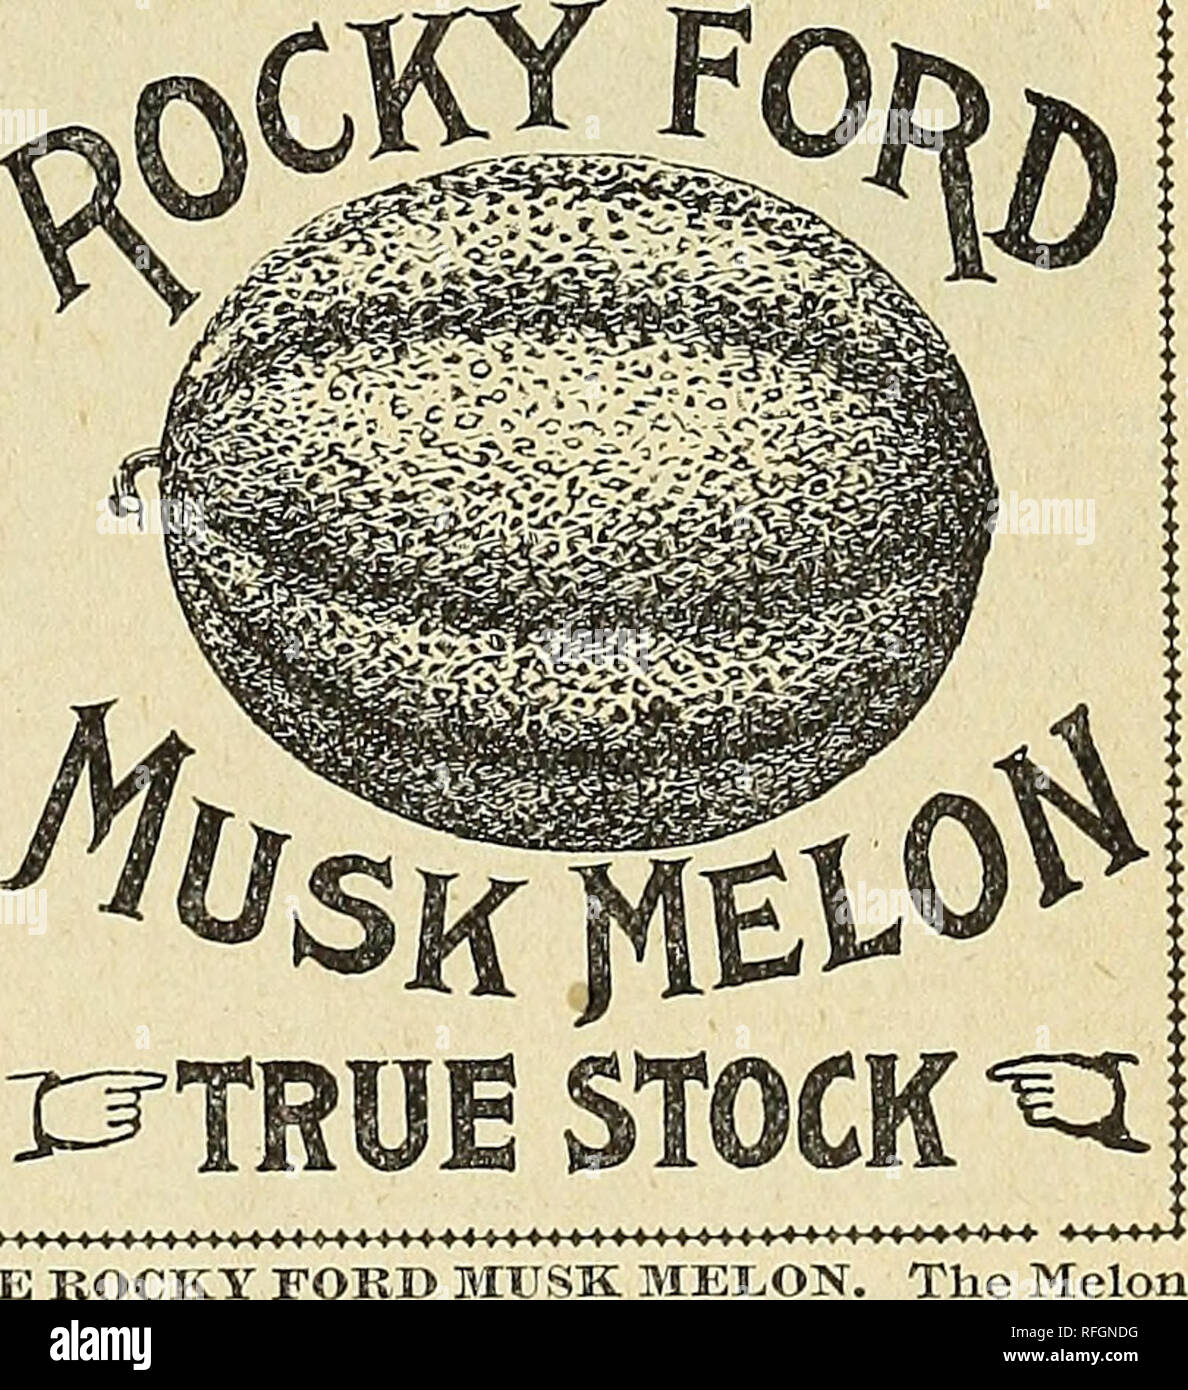 . Good seeds at fair prices : 1900. Nursery stock Minnesota Minneapolis Catalogs; Cereal grasses Catalogs; Vegetables Seeds Catalogs; Grasses Seeds Catalogs; Flowers Catalogs; Agricultural implements Catalogs. THE CELEBRATED FOi. Paul Rose Blusk Melon. THE ROCKY FORD MUSK MELON, known on the &quot;bills of fare&quot; of the leading hotels and restaurants of America as the &quot; Rocky Eord Cante- loupe,&quot; takes its name from the little town of Rocky Ford, Colorado, which has become as famous for its- melons as is Baltimore for its oysters. It is verj' early and wonderfully productive. We o Stock Photo